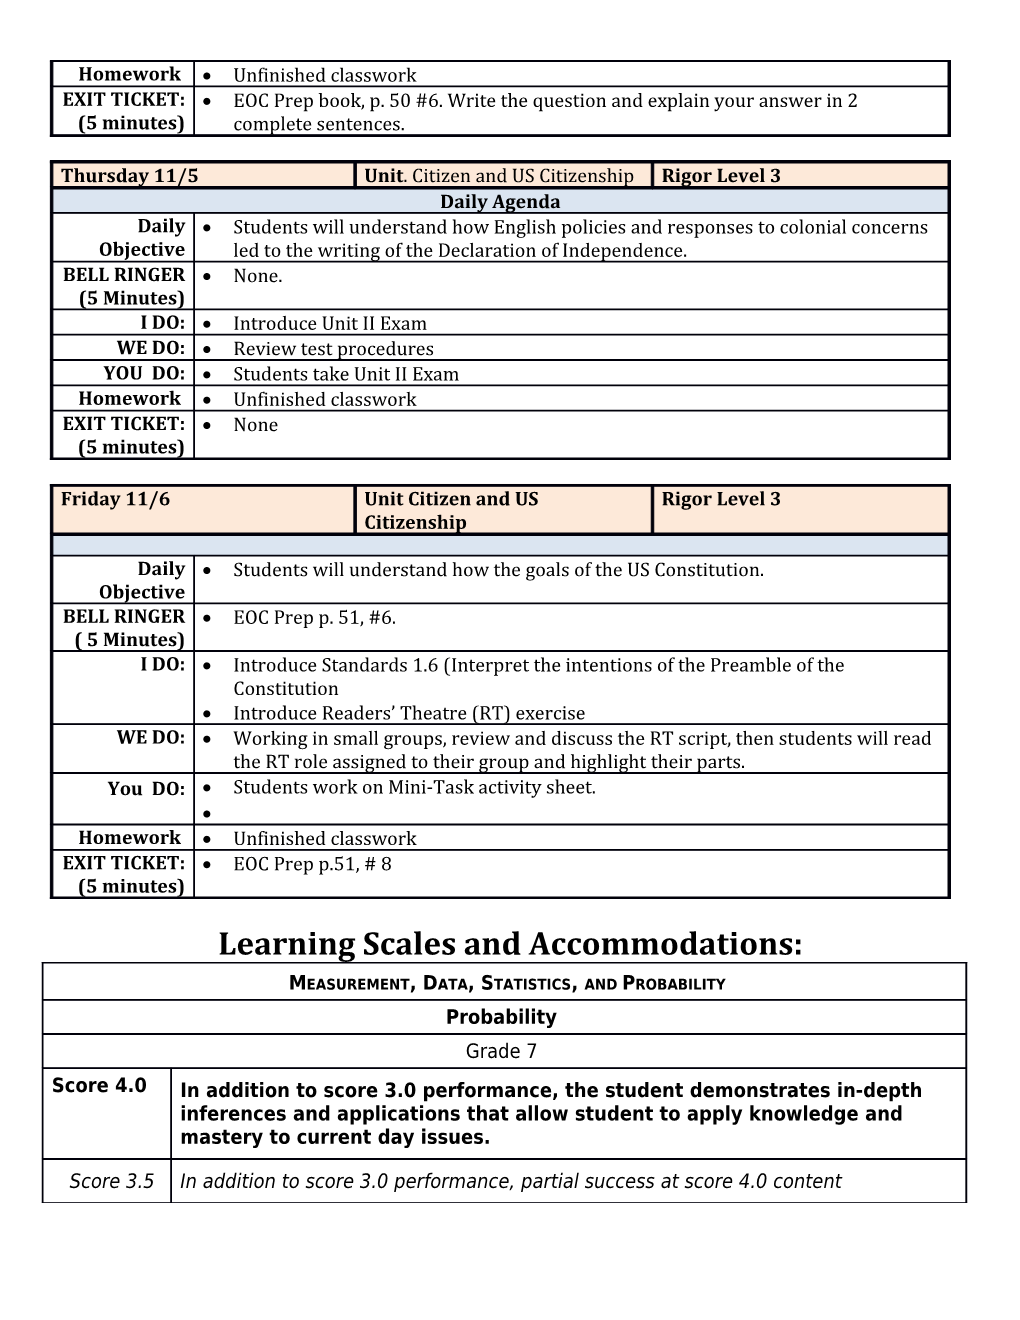 Learning Scales and Accommodations s1